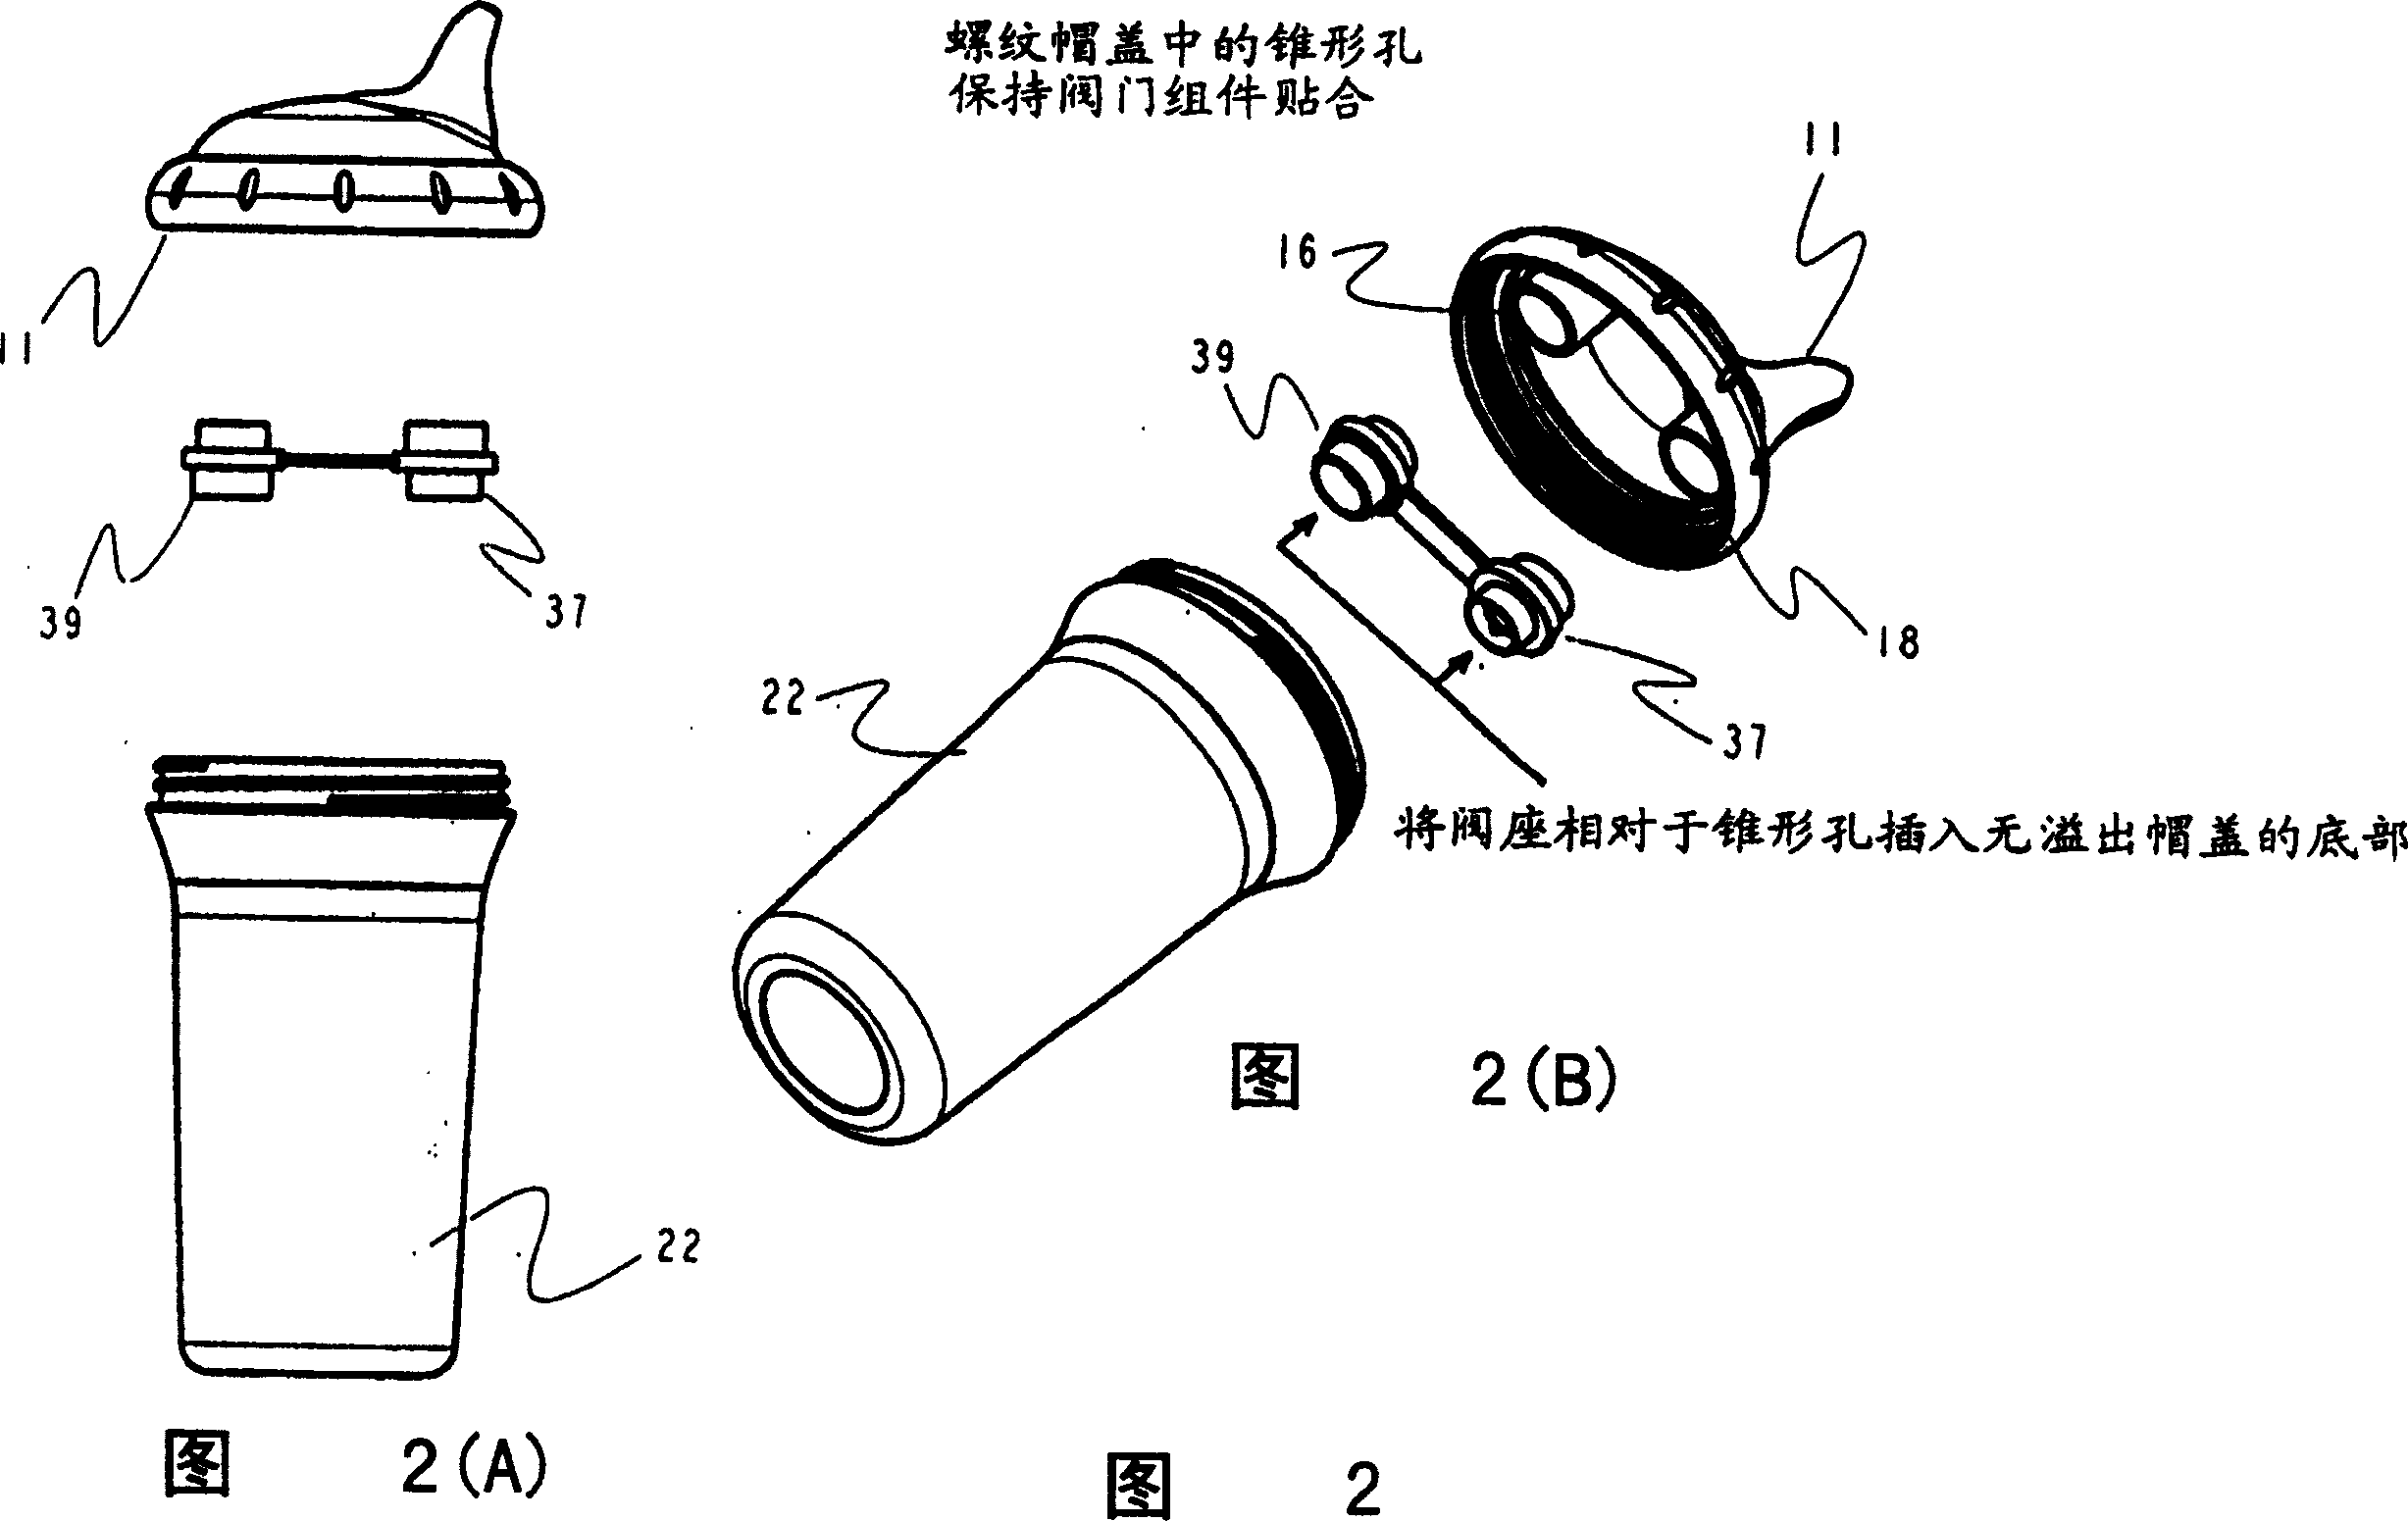 Non-overflow drinking cup device